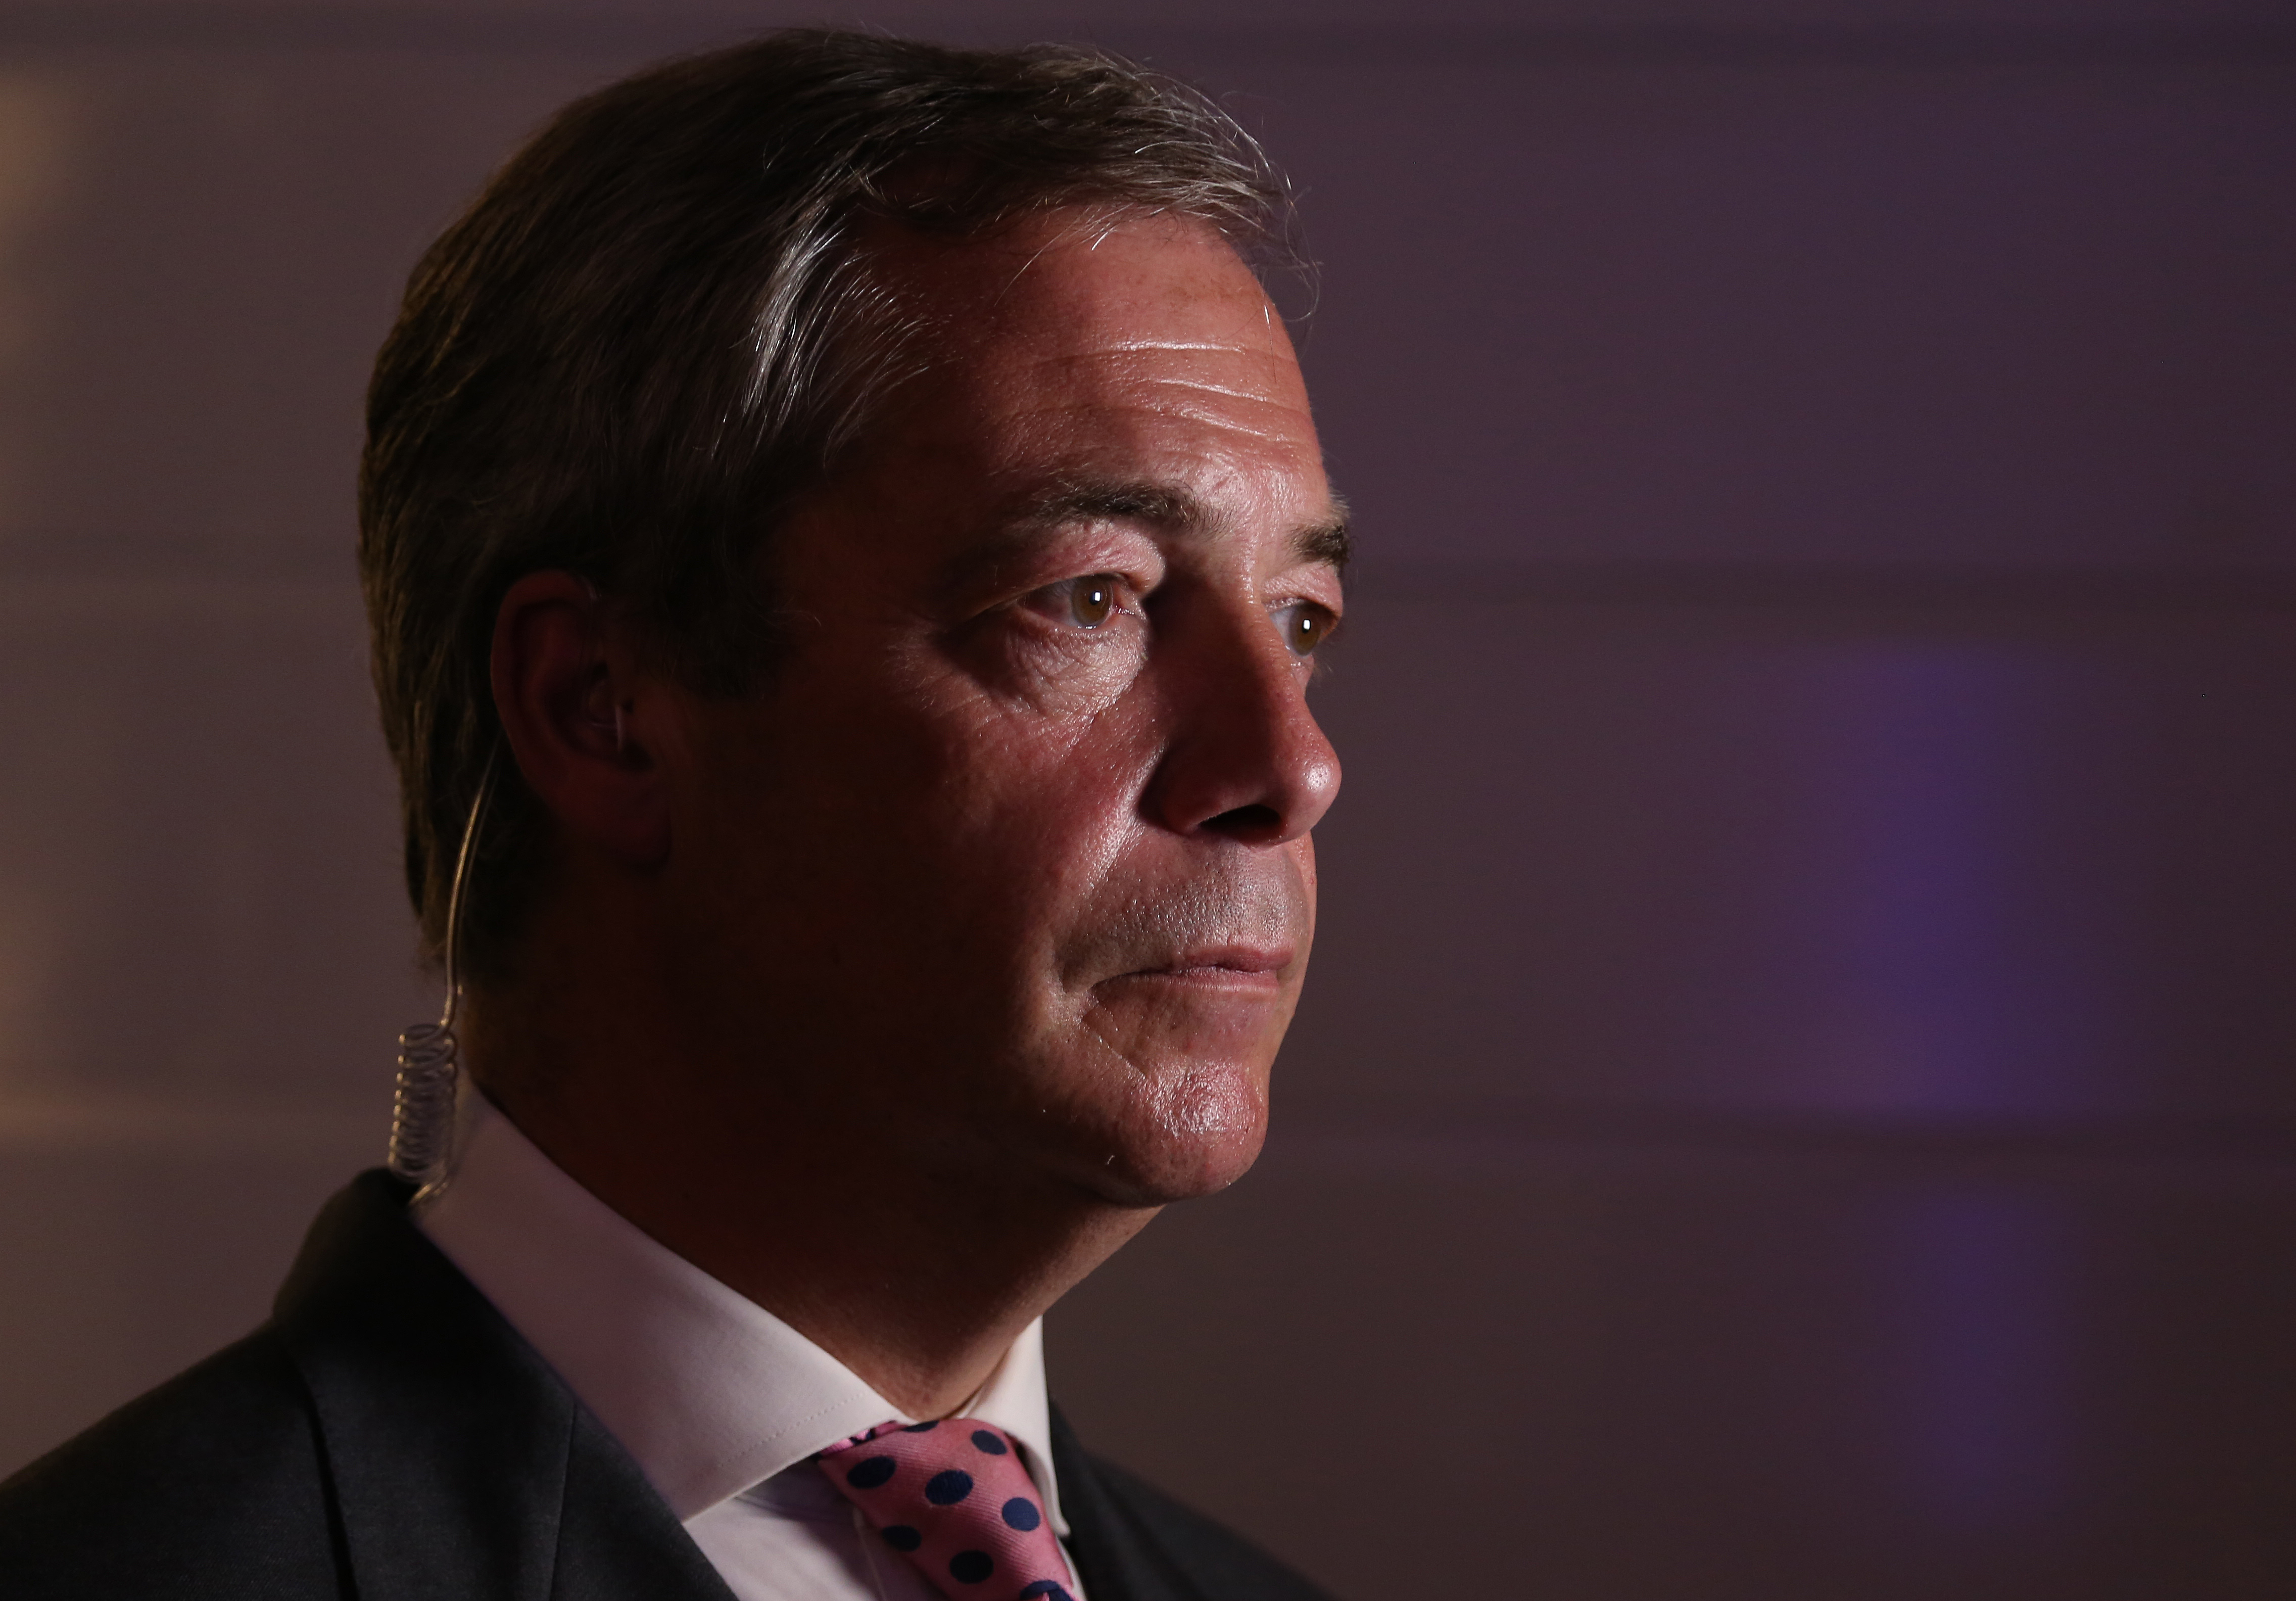 Nigel Farage during an interview in London on June 23 2016. (Goeff Caddick—AFP/Getty Images)